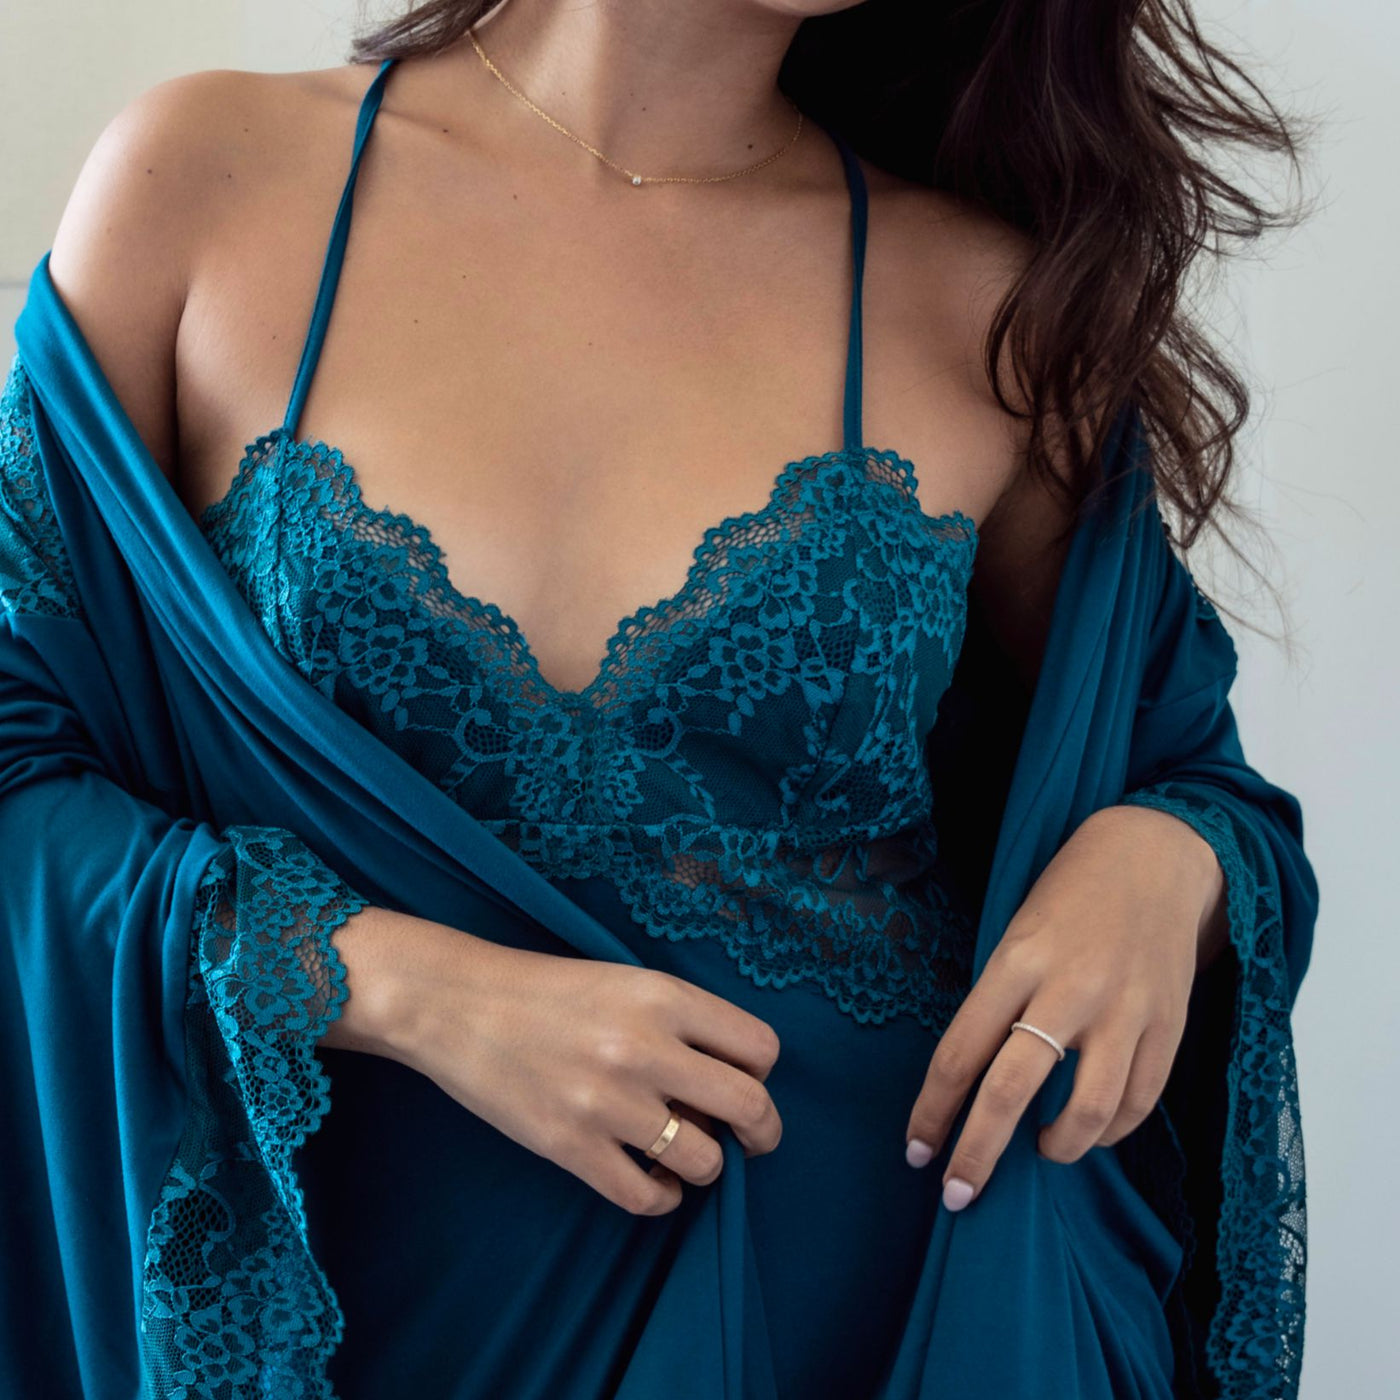 Jonquil Aegean Sea Chemise AGS010 in Deep Teal-Loungewear-Jonquil in Bloom-Deep Teal-XSmall-Anna Bella Fine Lingerie, Reveal Your Most Gorgeous Self!